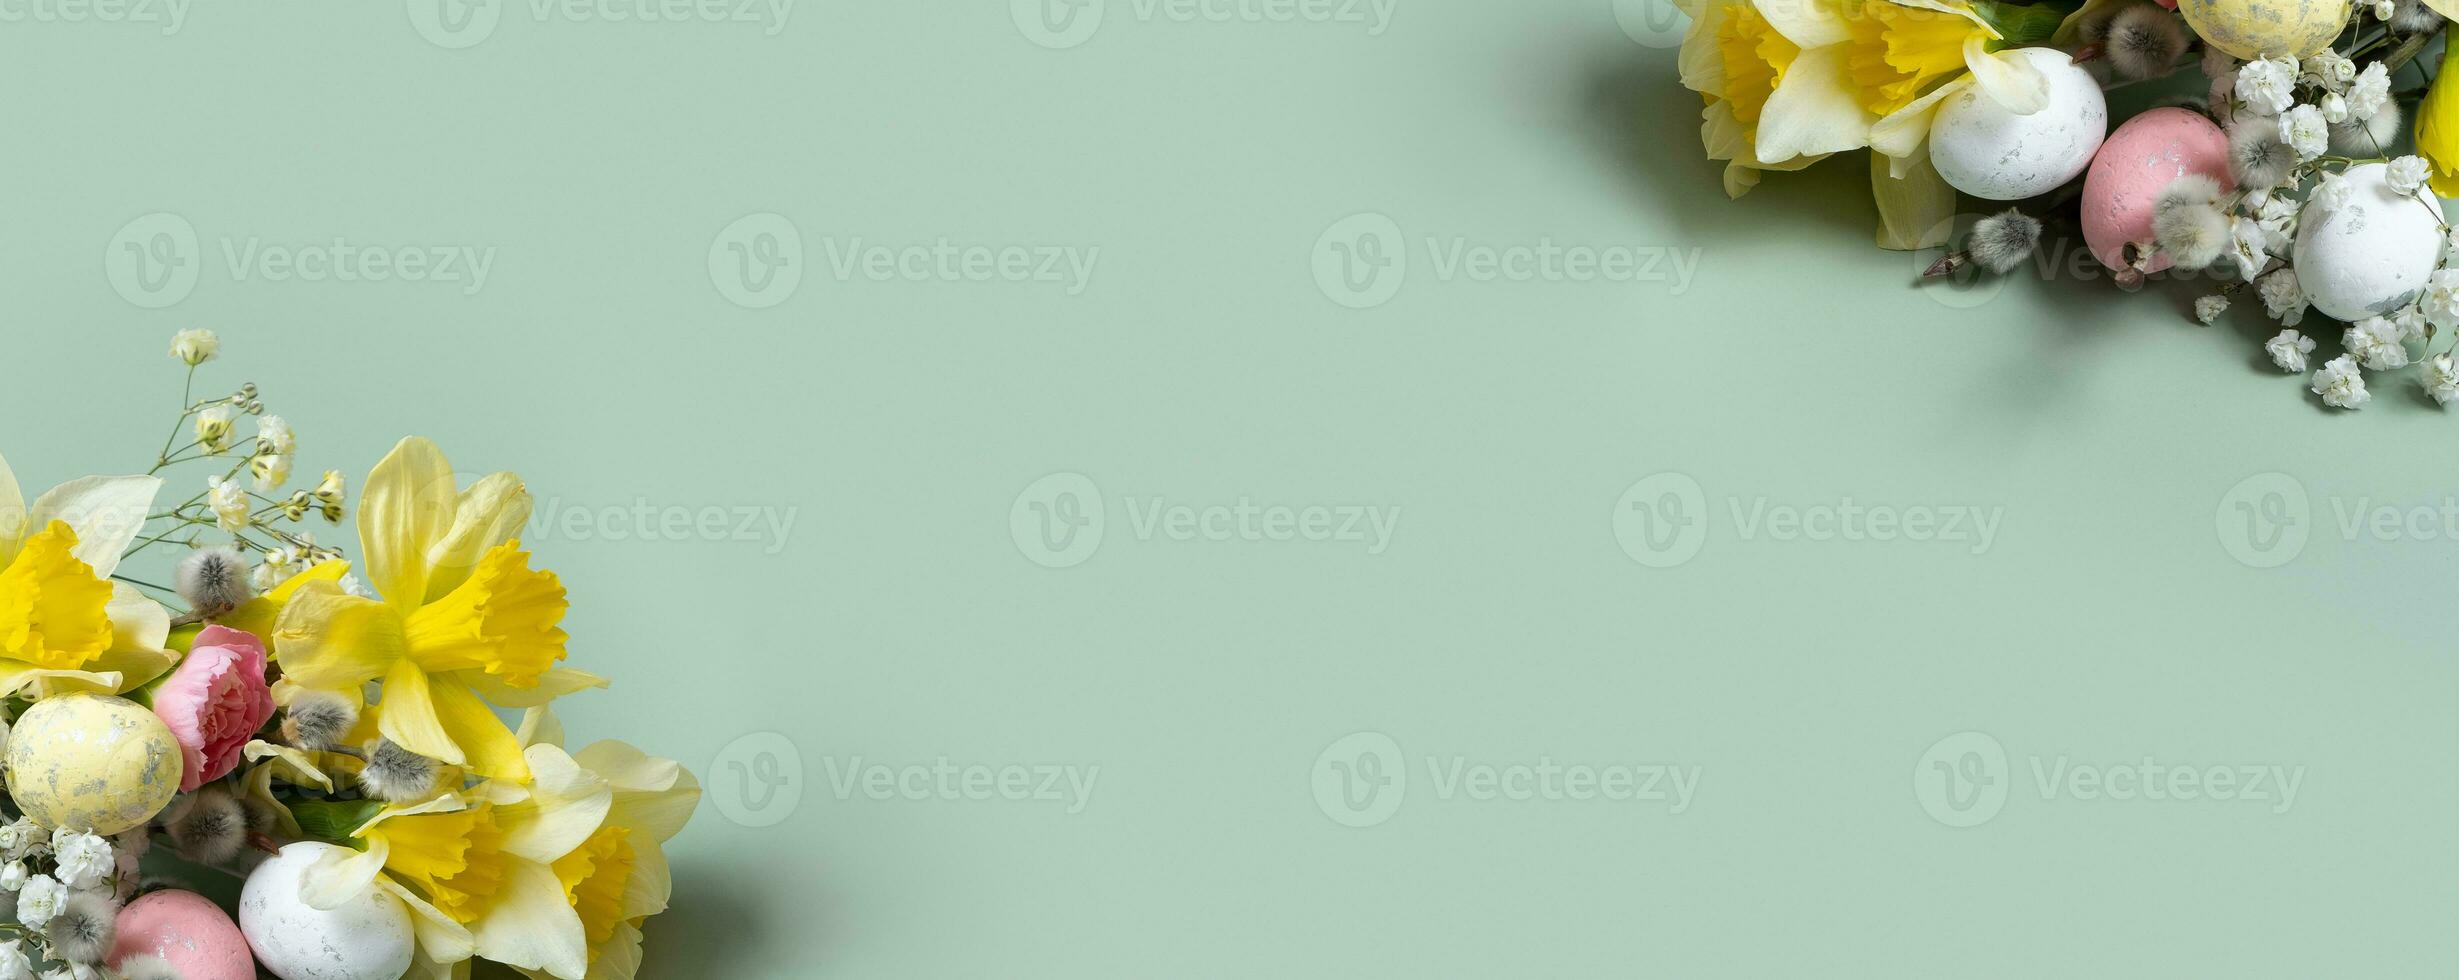 Daffodils, easter eggs and willow on green background with copy space. Easter greeting banner template photo